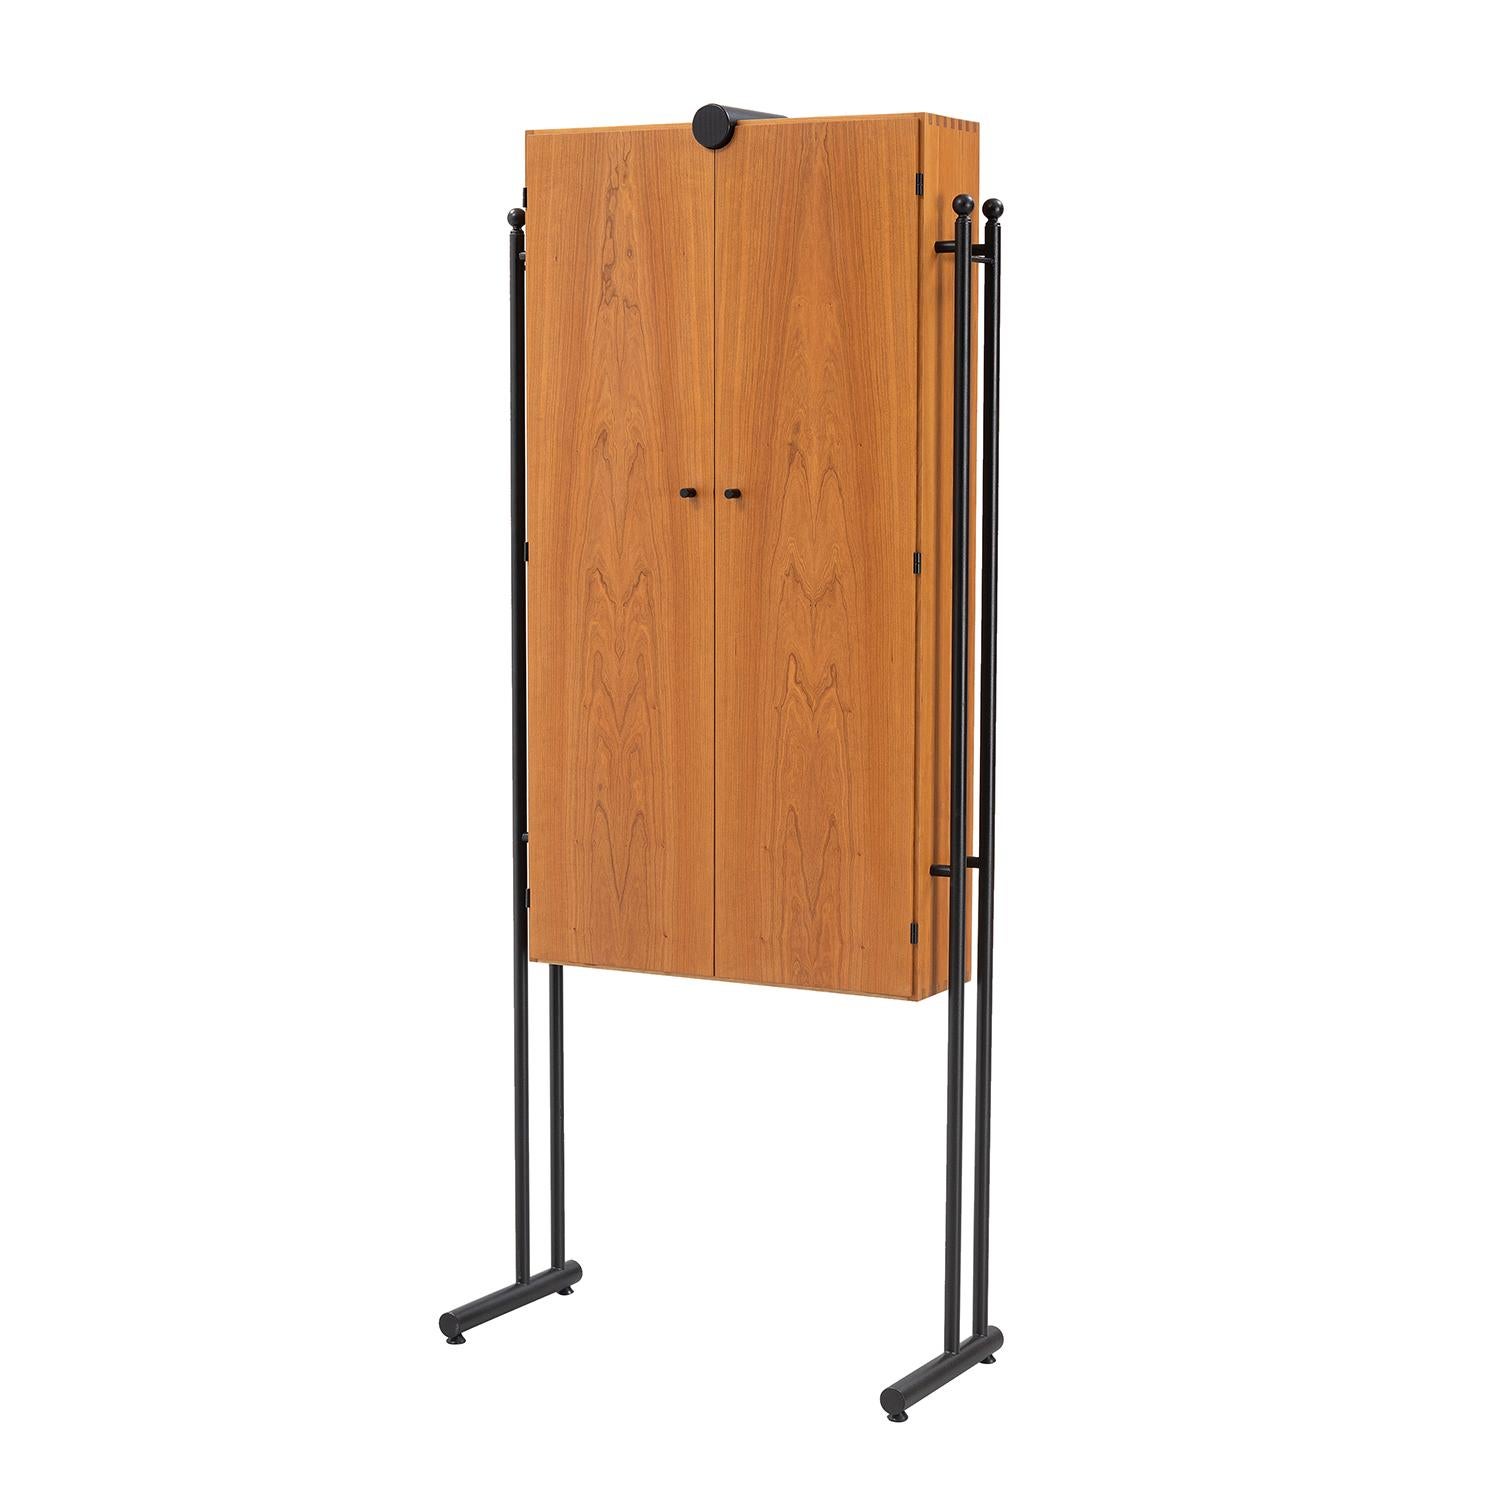 A light-brown, vintage Mid-Cenutry modern Danish wardrobe, armoire made of hand crafted polished Walnut designed by Hadsten Träindustri and produced by Akuma, in good condition. The slim buffet is composed with two doors, particularized by two round